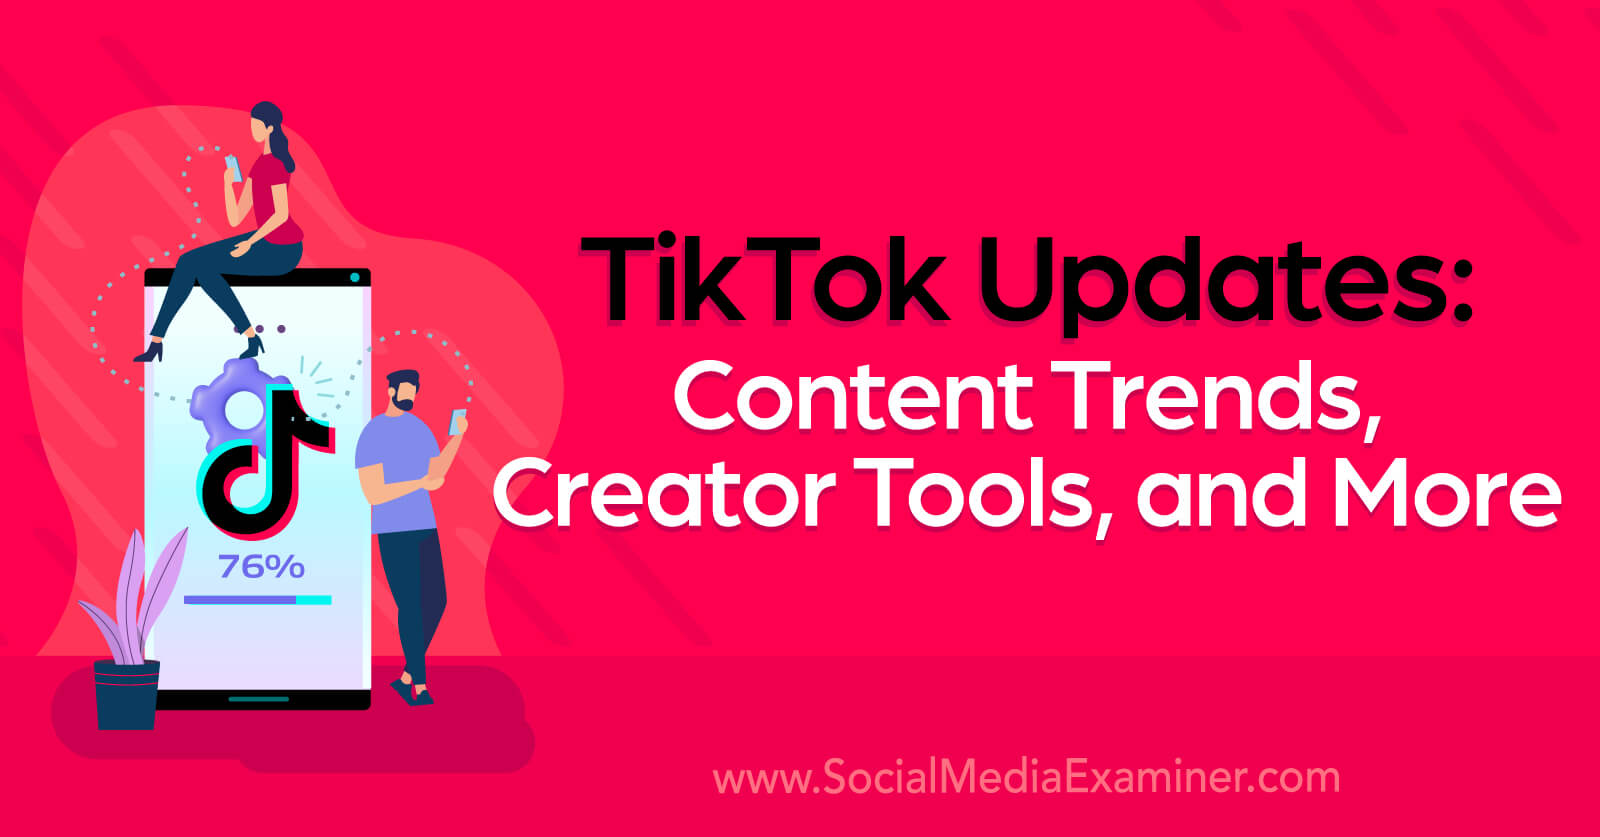 TikTok Updates: Content Trends, Creator Tools, and More by Social Media Examiner